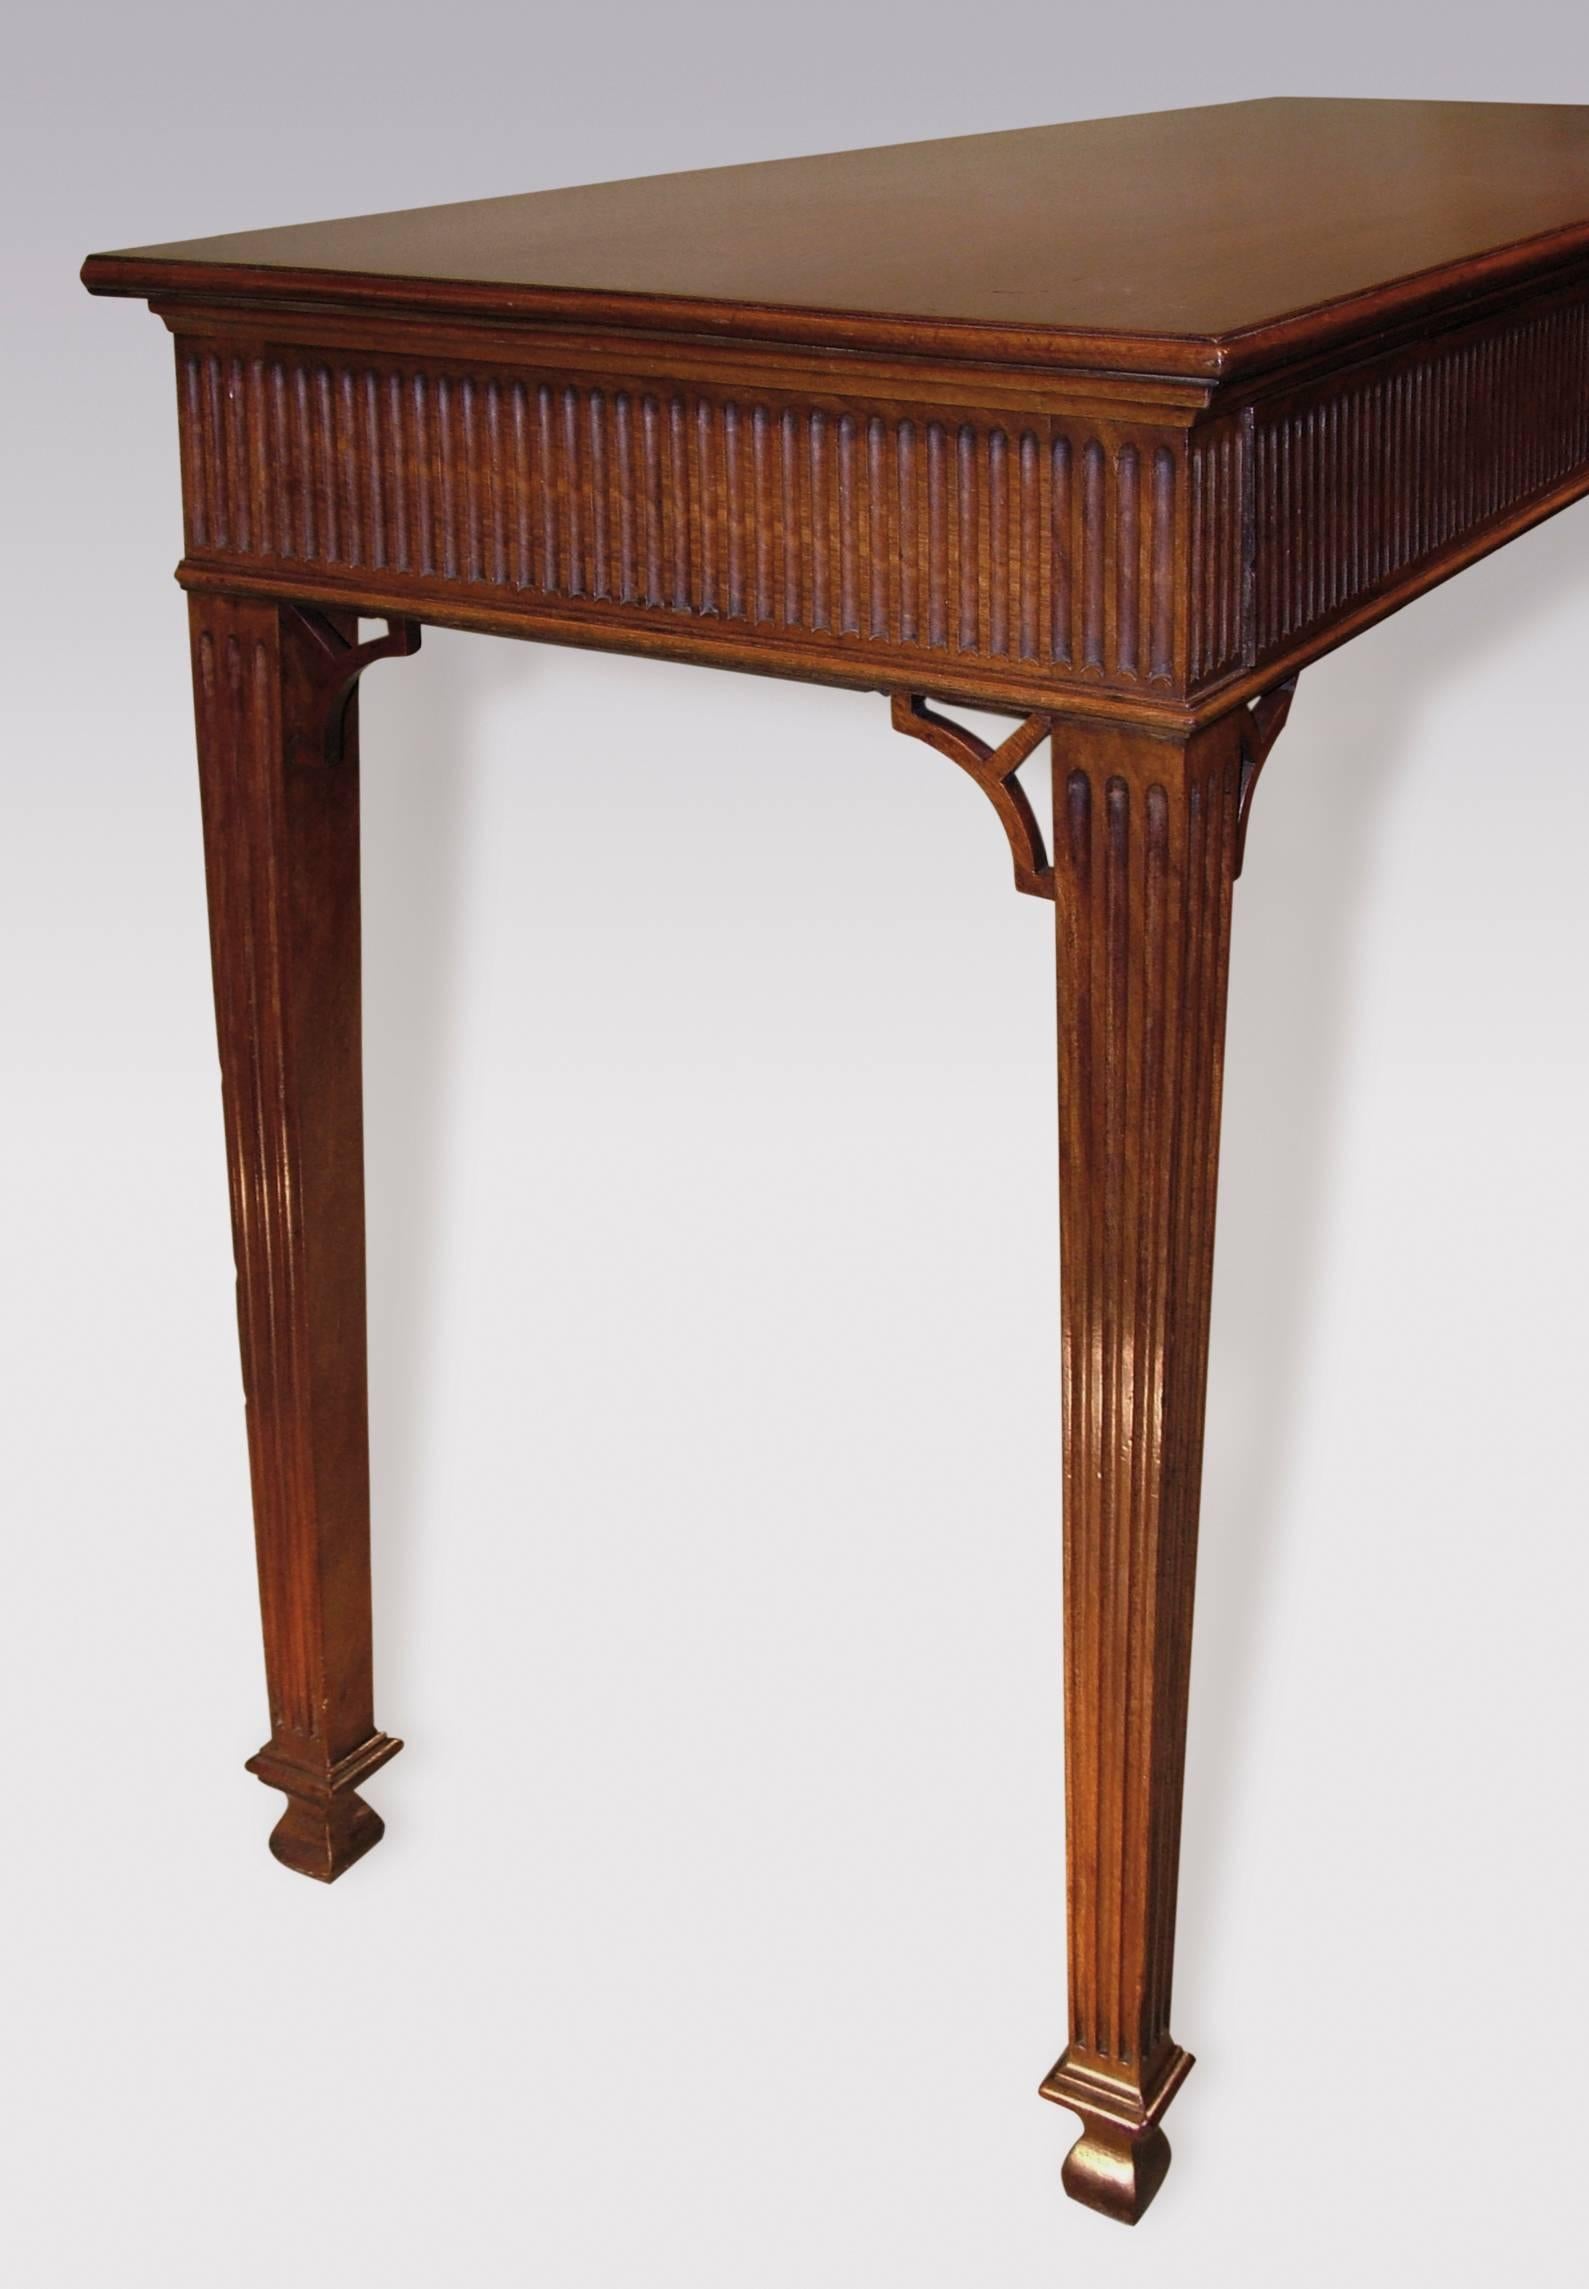 A mid-18th century Chippendale period figured mahogany Serving Table, having moulded edged rectangular top, above fluted frieze with concealed drawers, supported on fluted tapering legs with pierced corner brackets ending on “club” feet.